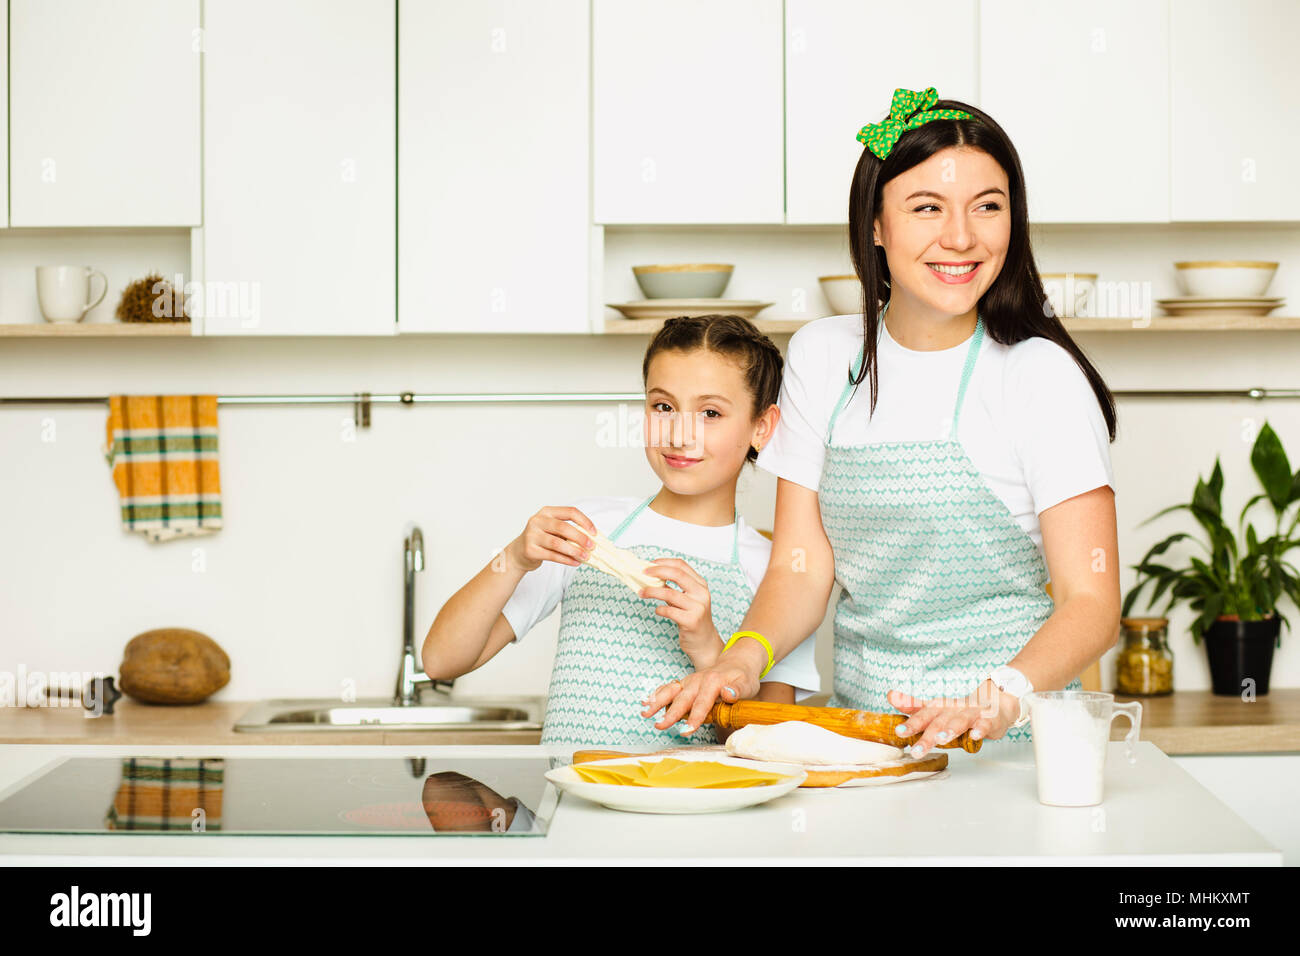 Flour and fun make for some delicious food. Shot of a pretty girl having fun baking with her mother at white kitchen Stock Photo